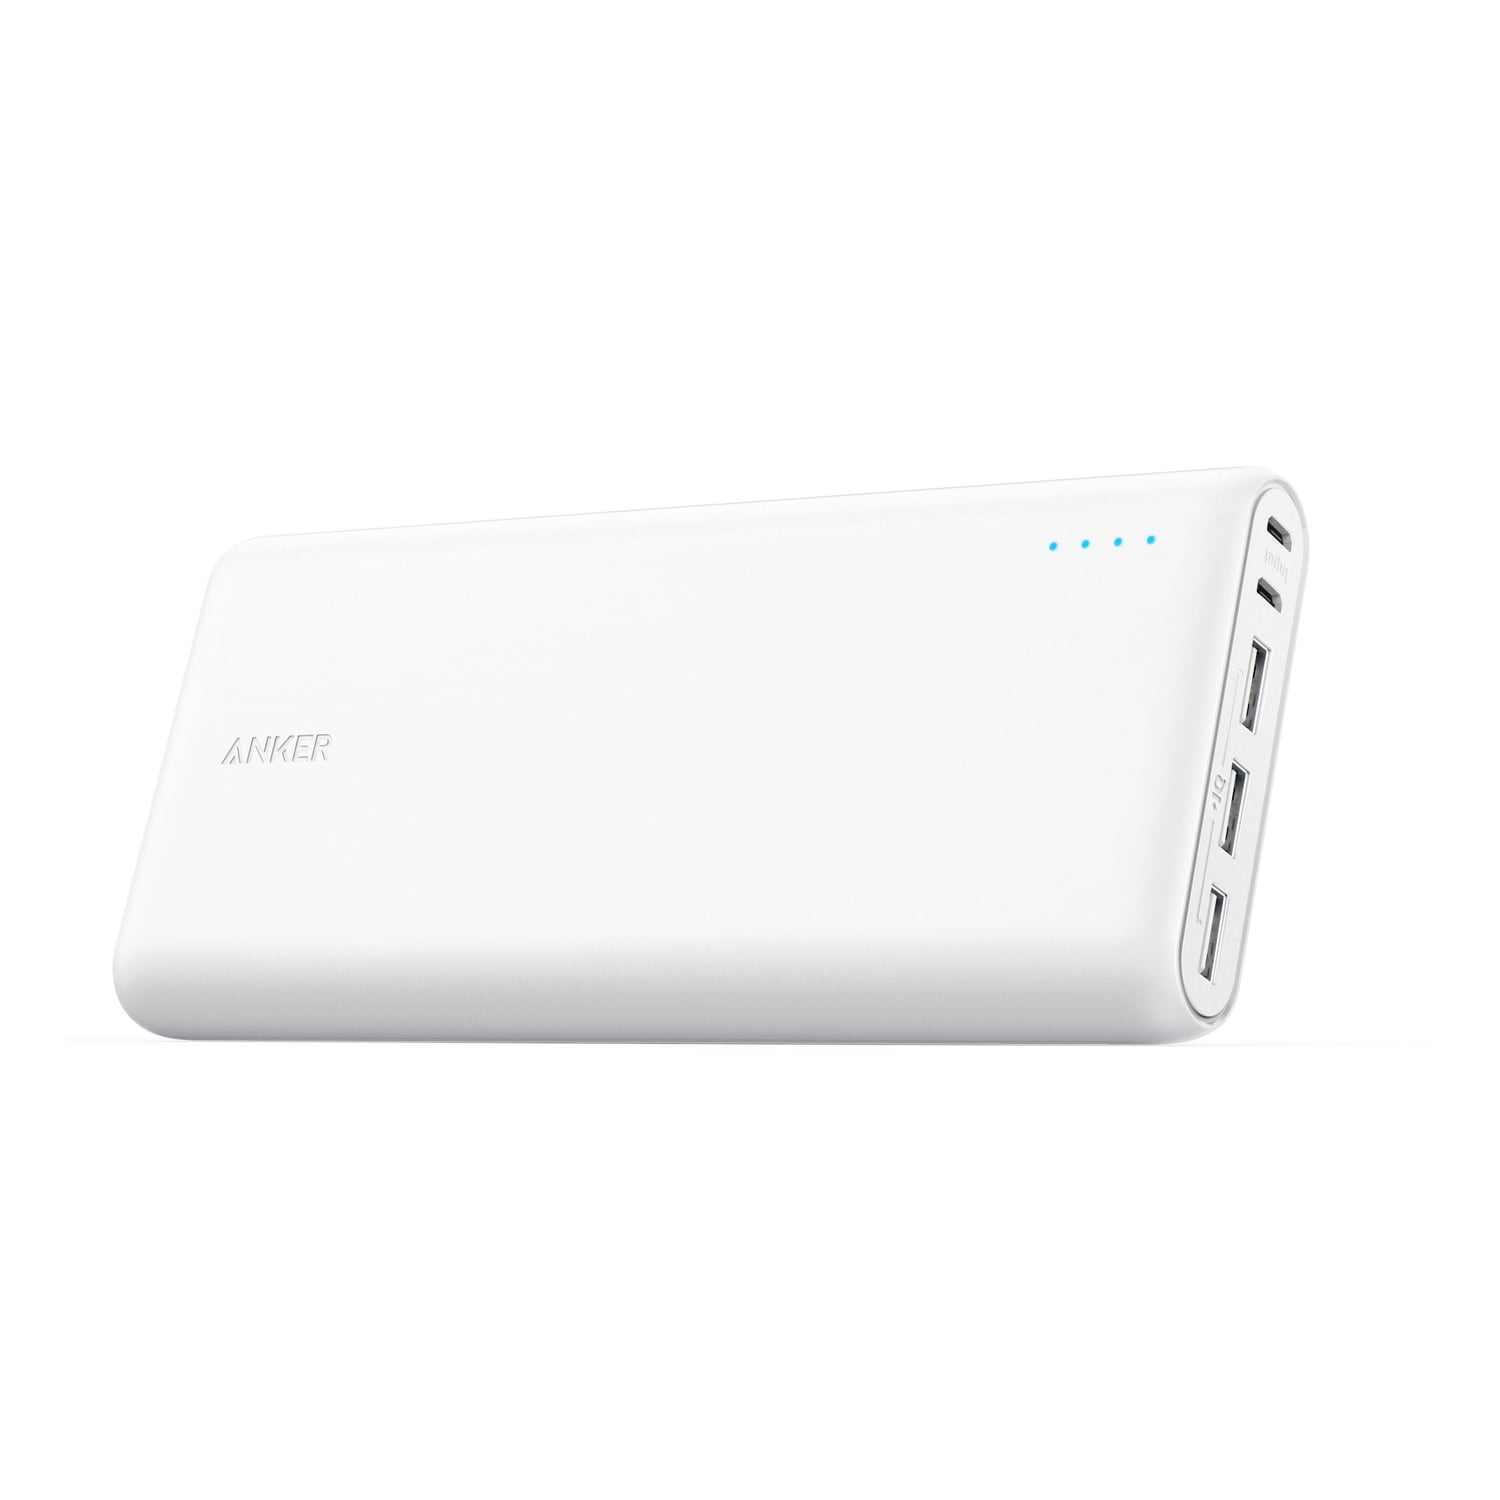 Anker 26800mAh Portable Charger,PowerCore 26800 Power Bank Battery